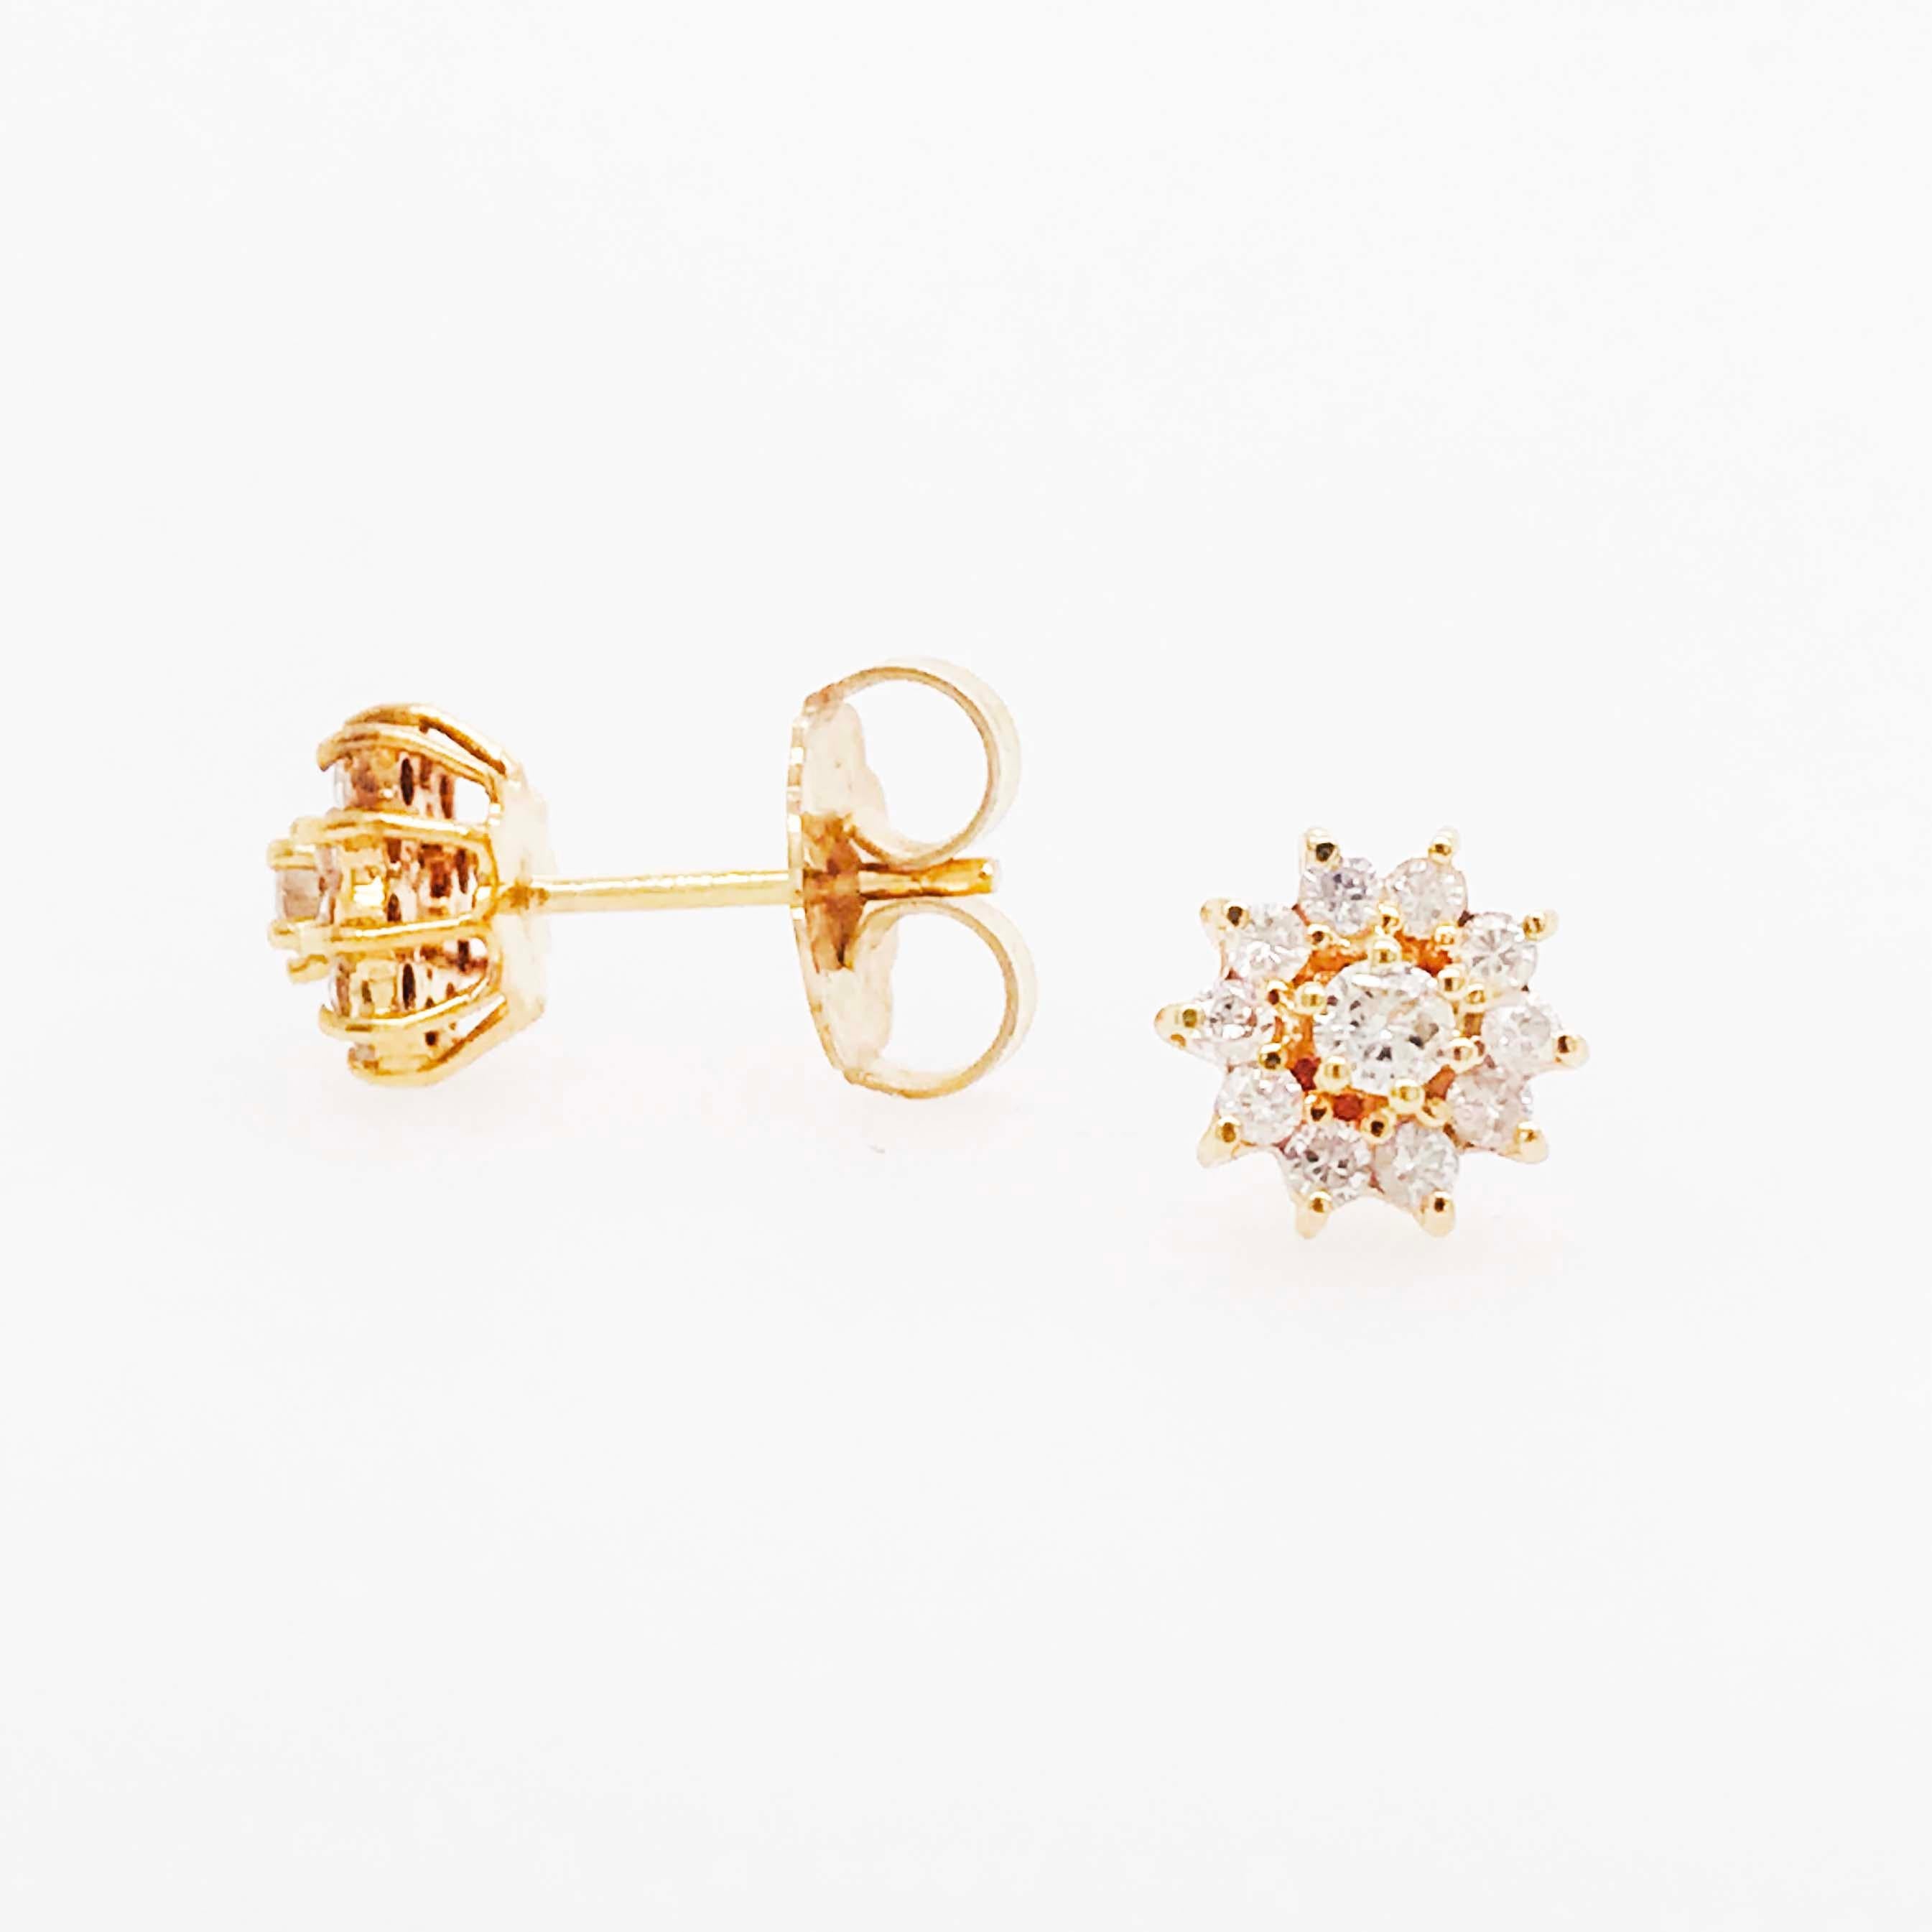 Diamond stud earrings are a staple in fine jewelry. They are great for every occasion! These diamond cluster earrings have round brilliant diamonds set in 14k yellow gold. In the center there is one round brilliant diamonds that is framed by a